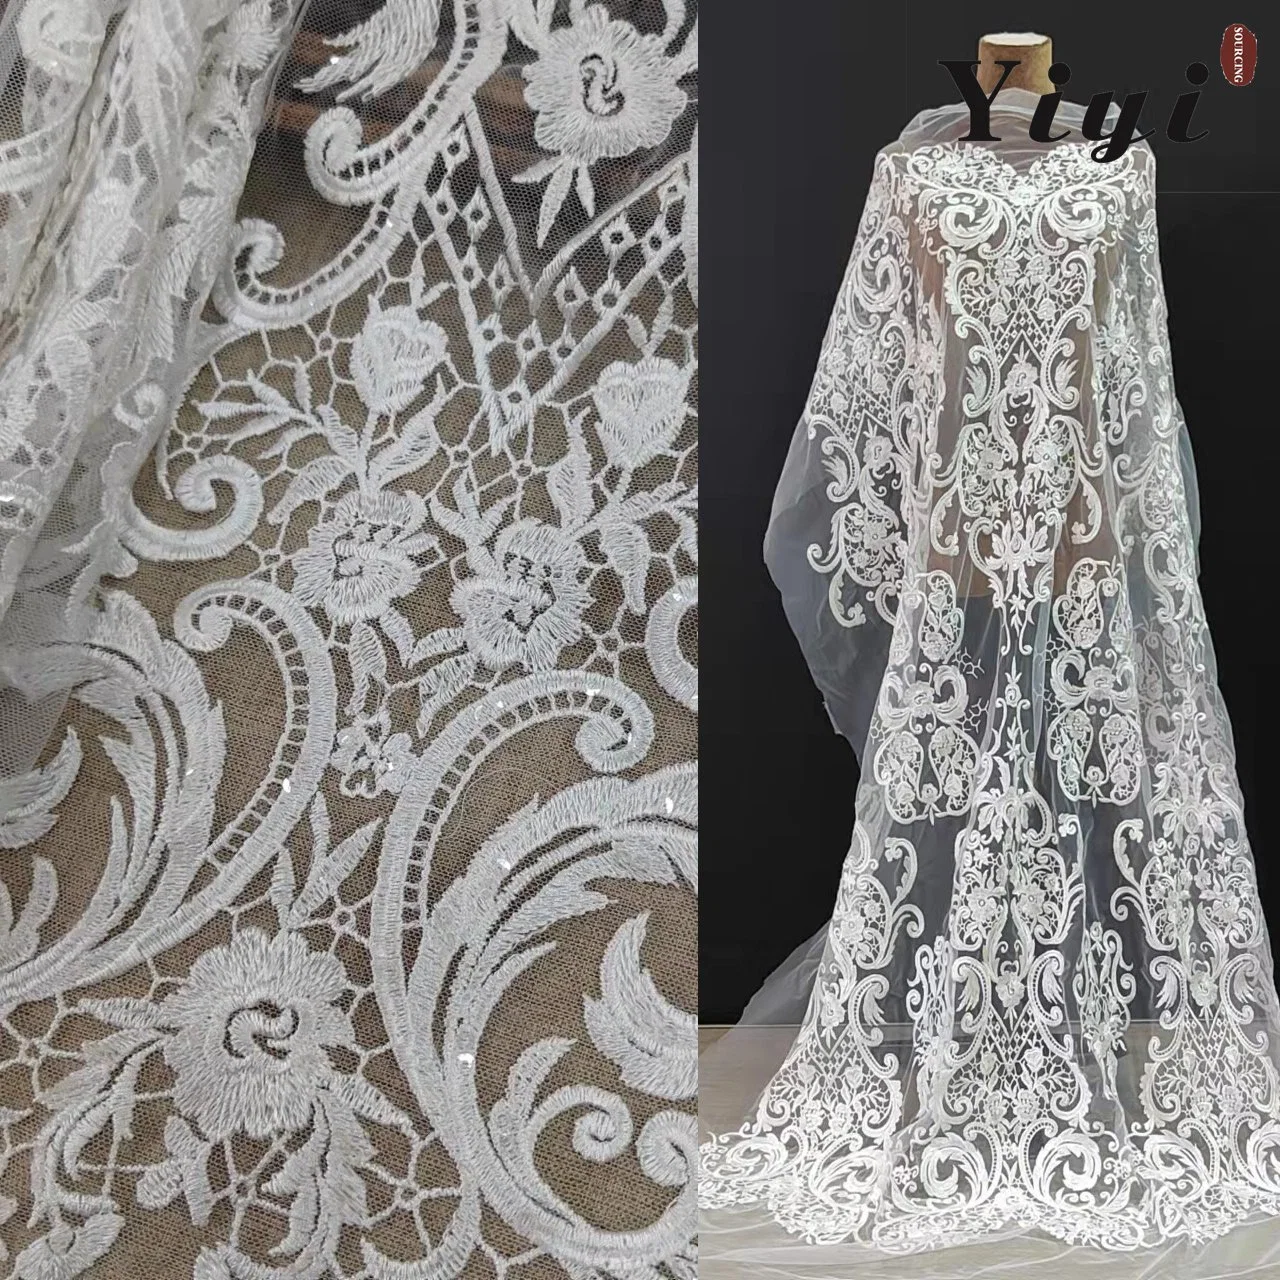 OEM/ODM Customized Fashion Luxury Tulle Bridal Mesh Beaded Lace Fabric Sequin Wedding Dress/Gown Embroidery Embroidered Clothing